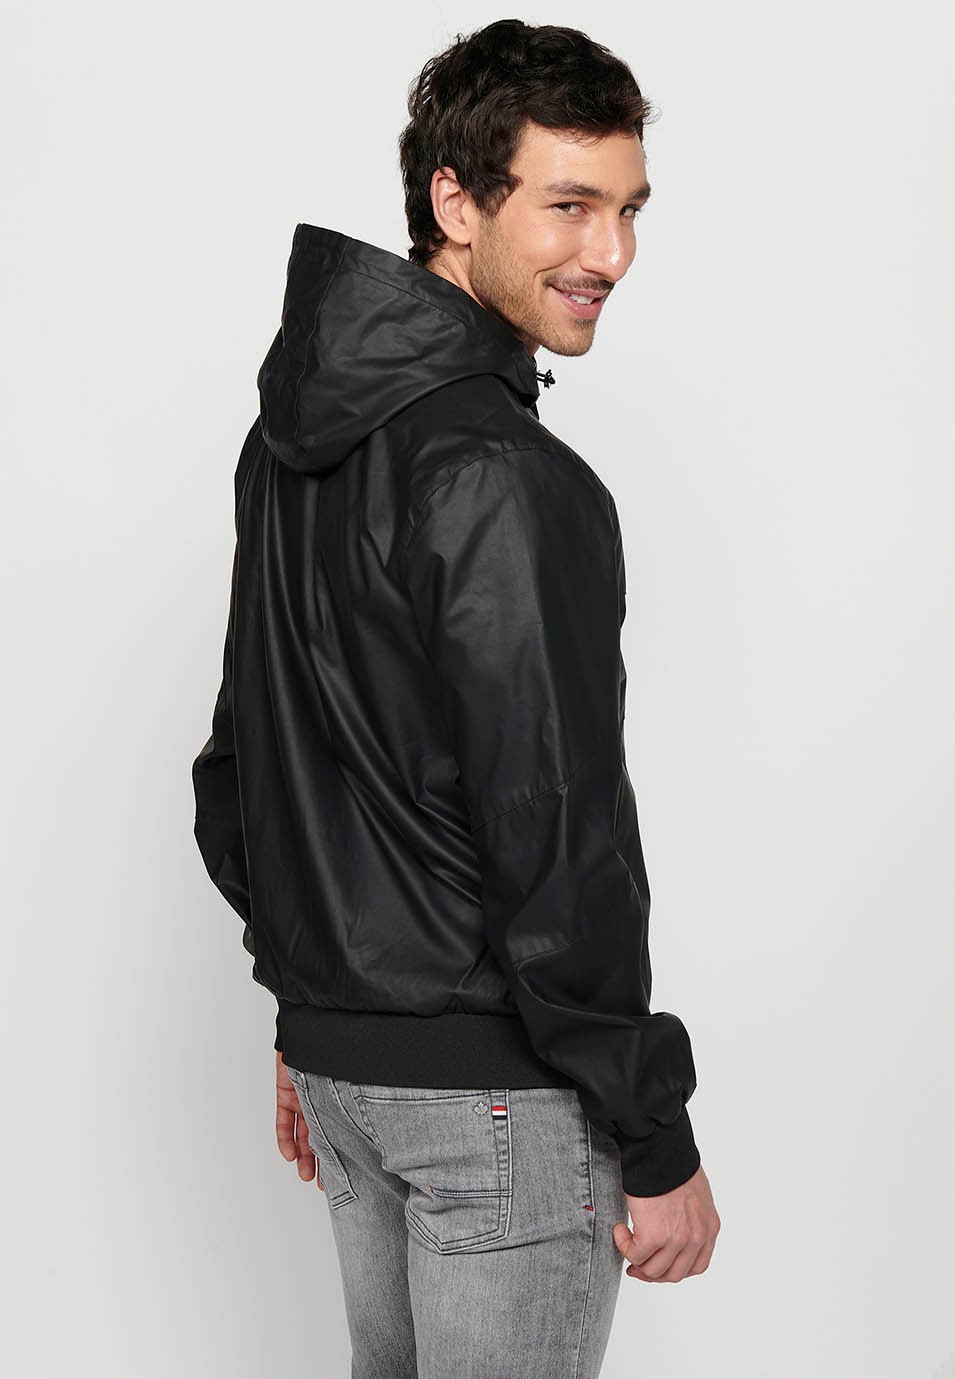 Leather-effect jacket with front zipper closure and hooded collar in black for Men 8